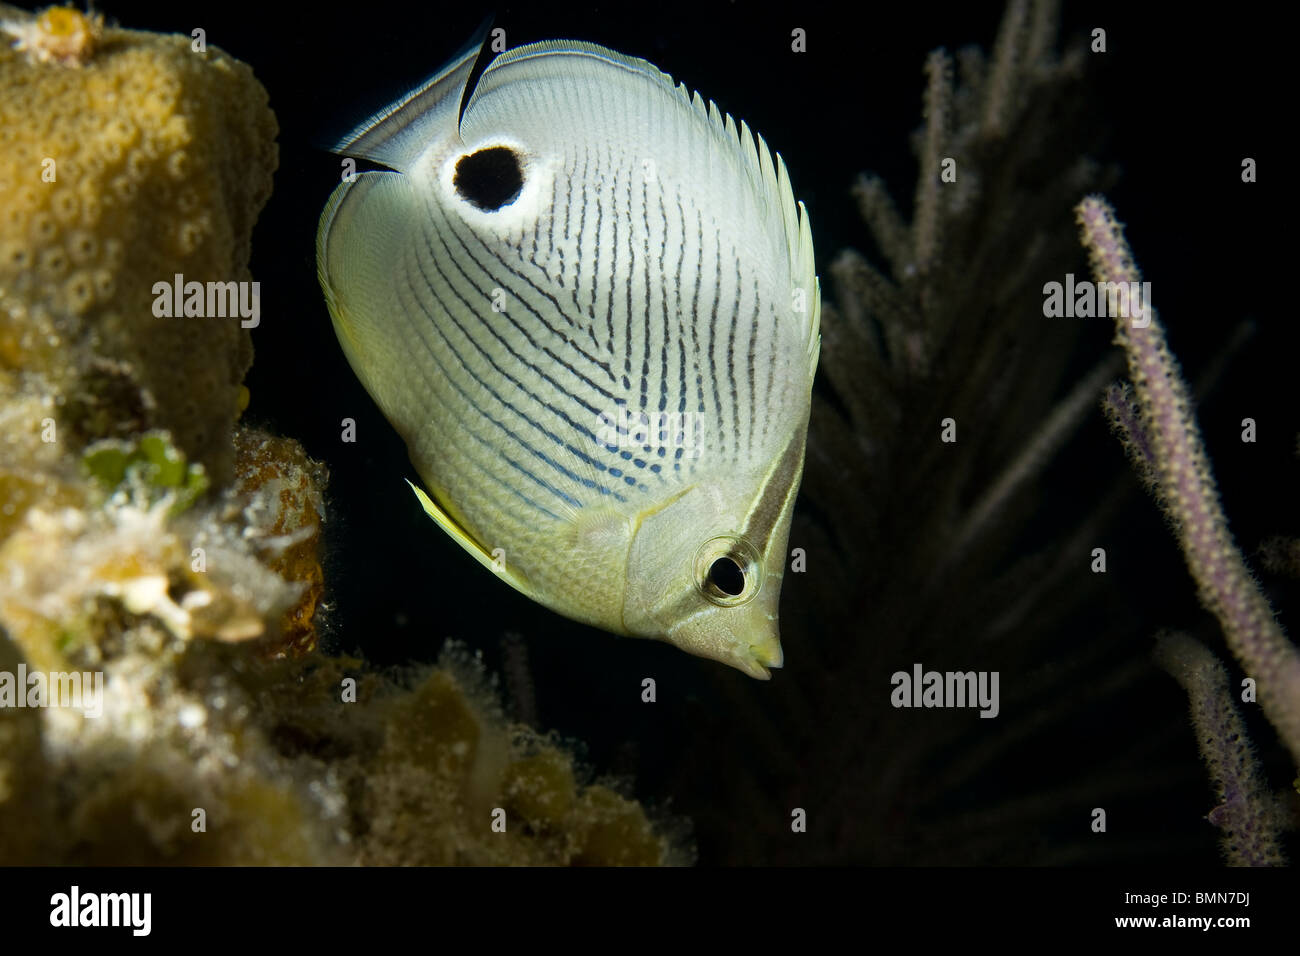 Four eyed butterfly fish Chaetodon capistratu Stock Photo